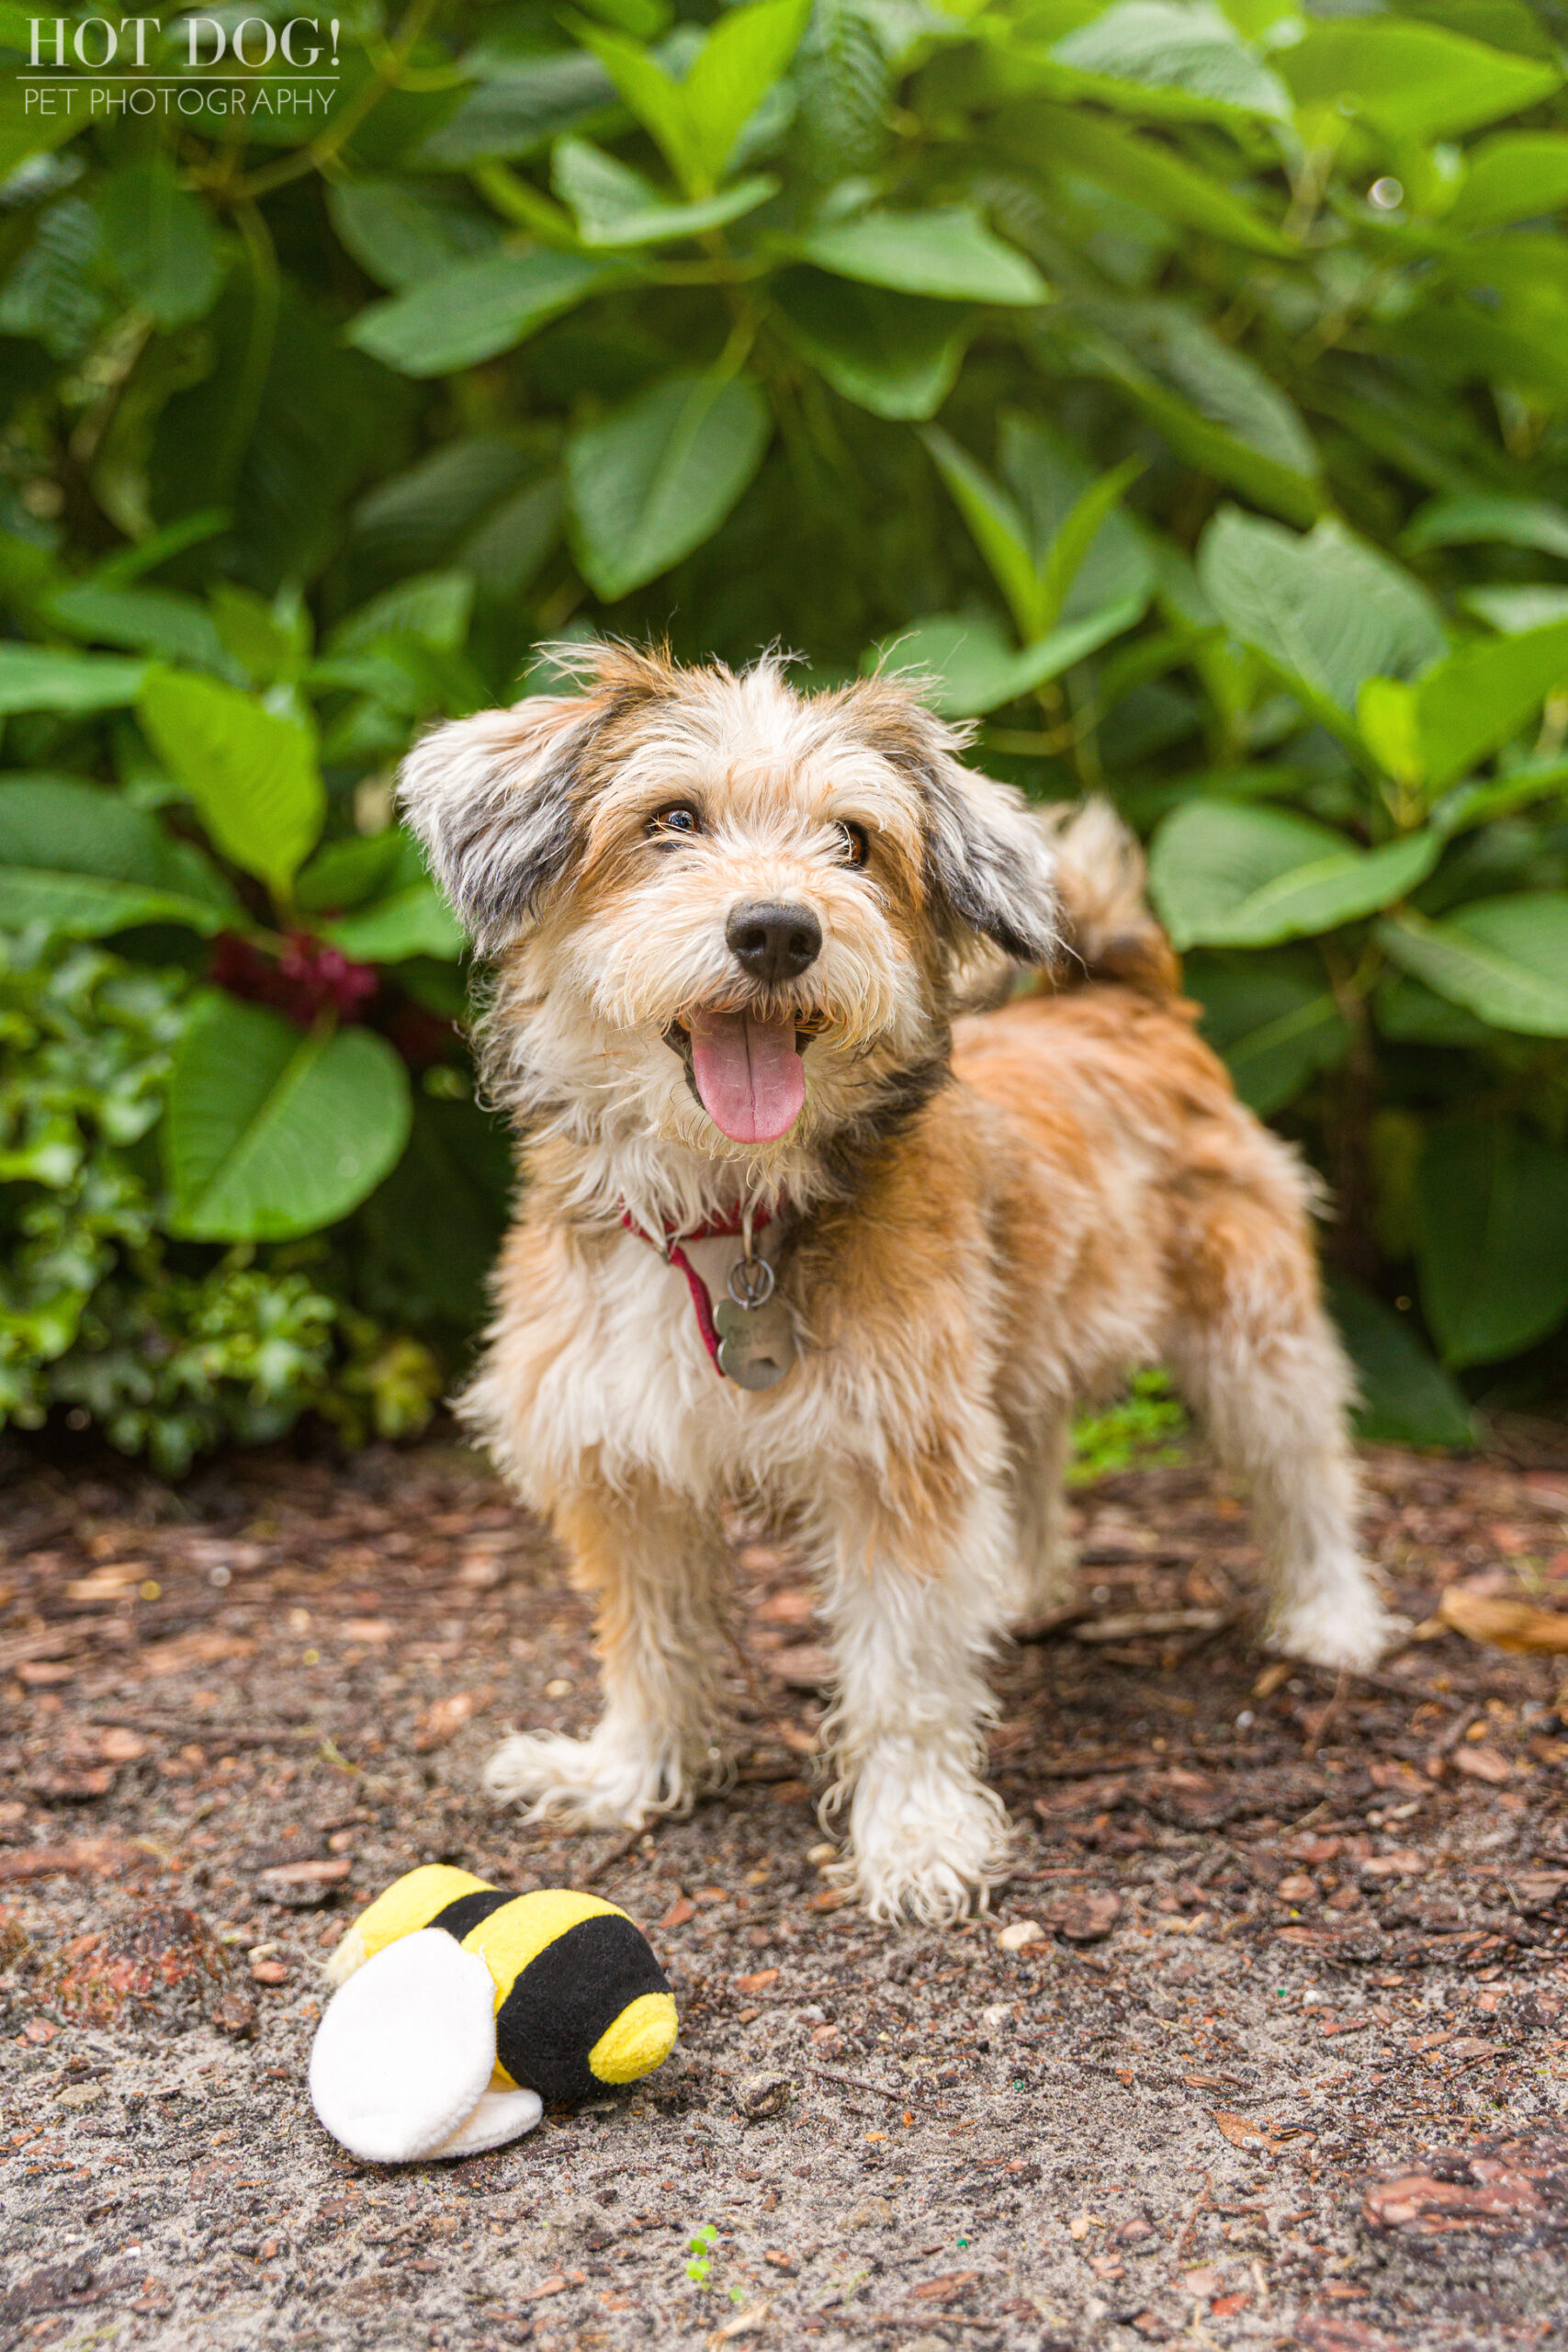 Terrier mix Otto looking cute and cuddly in his professional pet photo session with Hot Dog! Pet Photography.